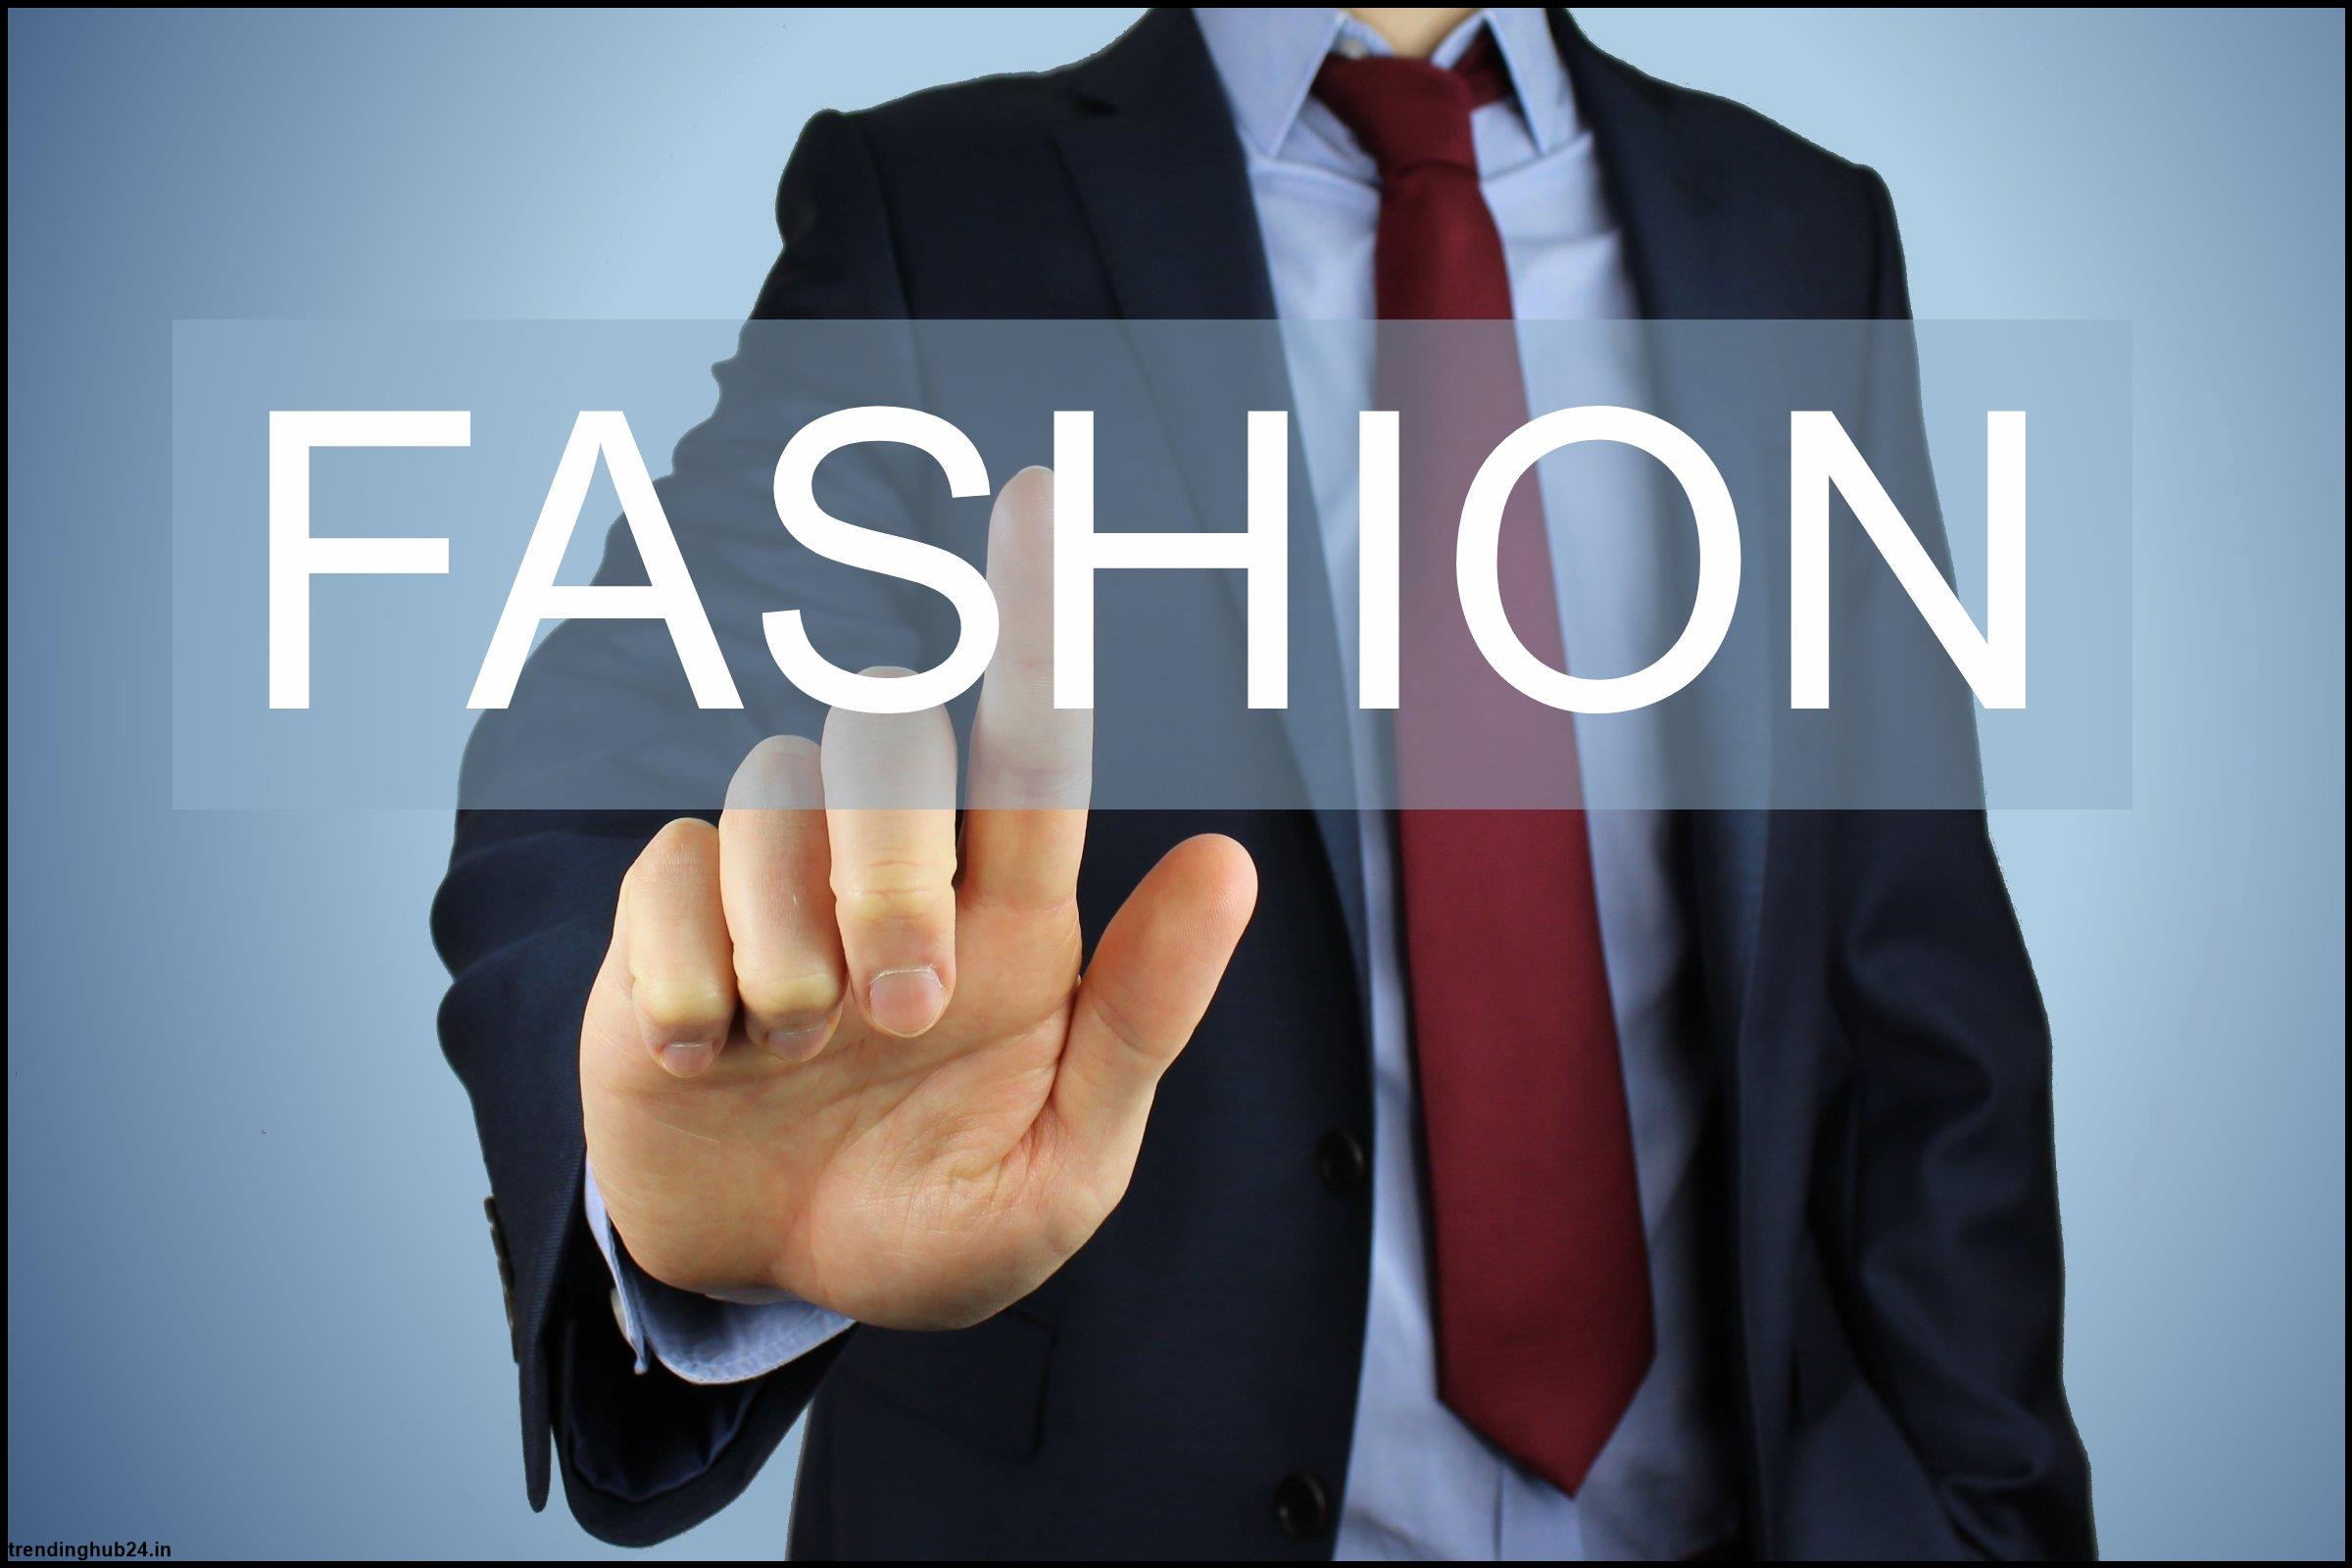 Information of Fashion and fashion is a way of life.jpg